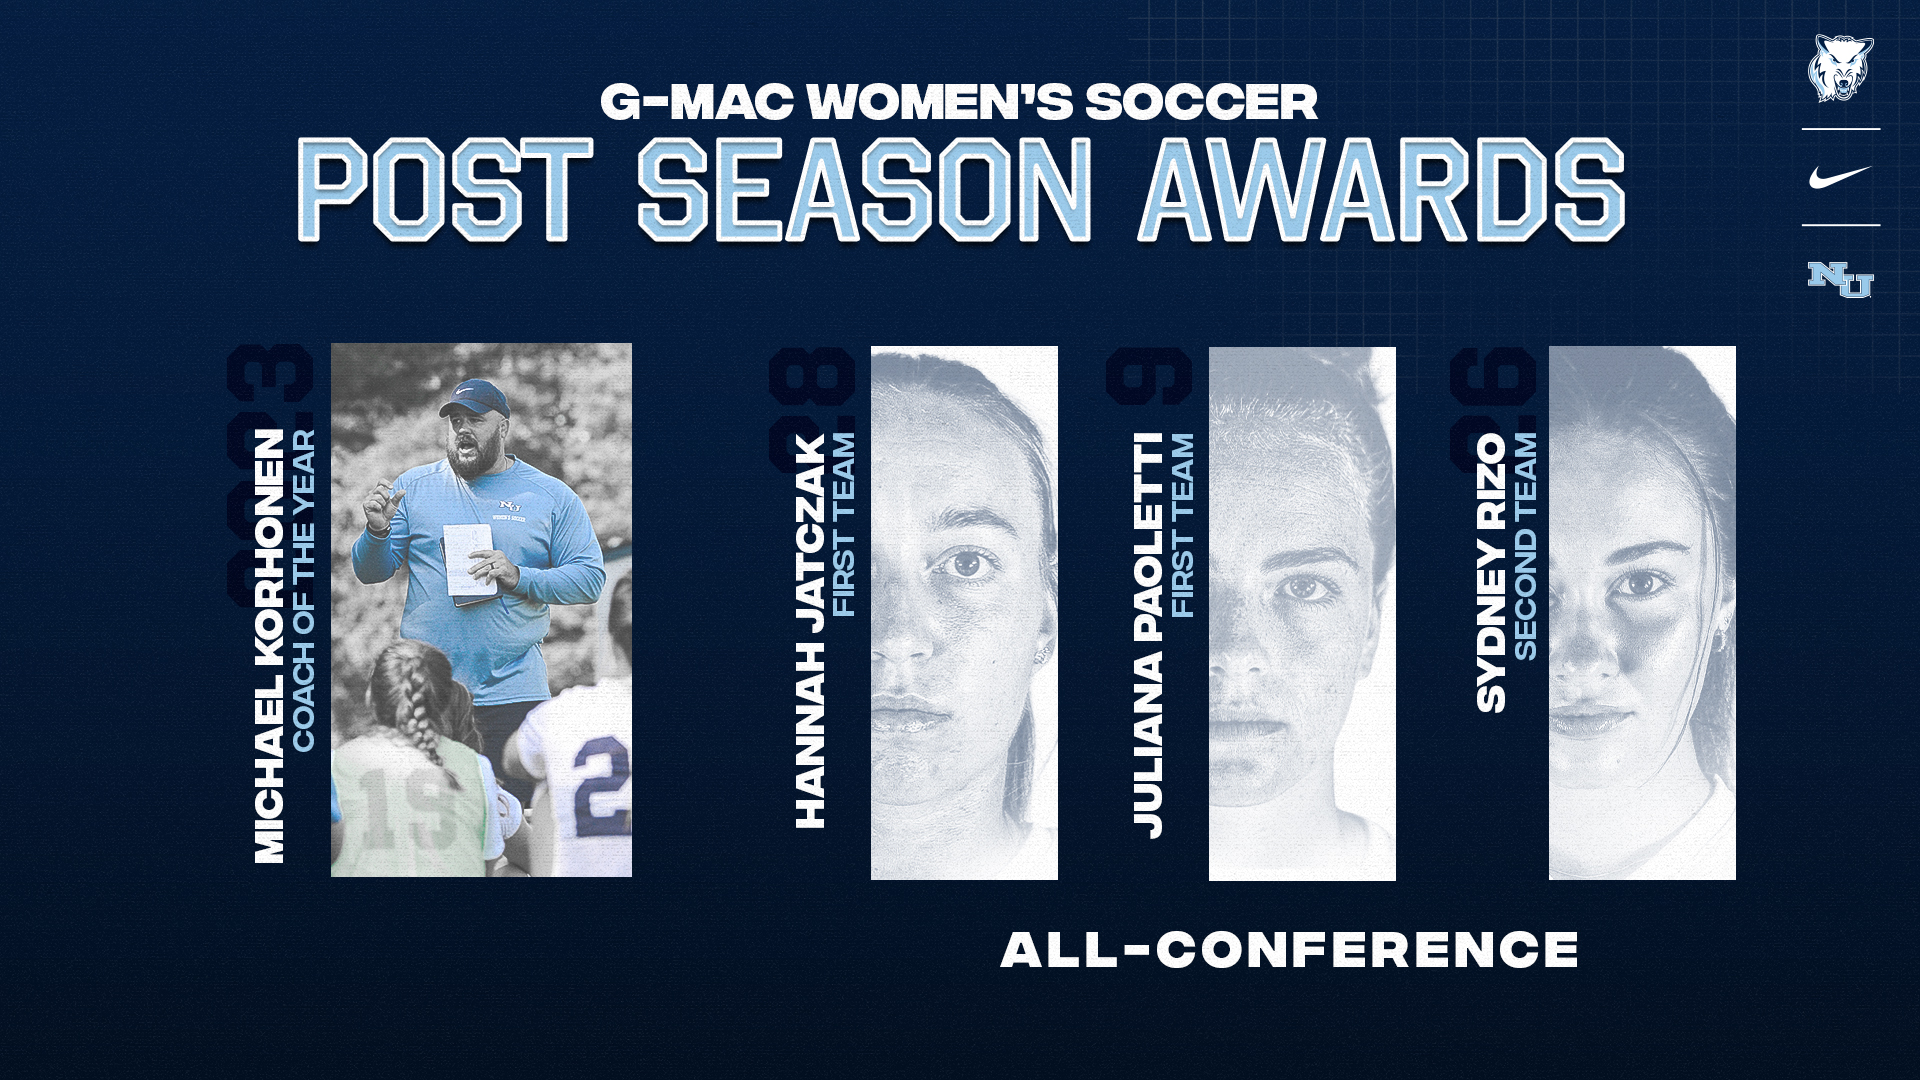 Korhonen Named G-MAC Coach Of The Year - Women's Soccer Has Three Athletes Earn All-Conference Honors